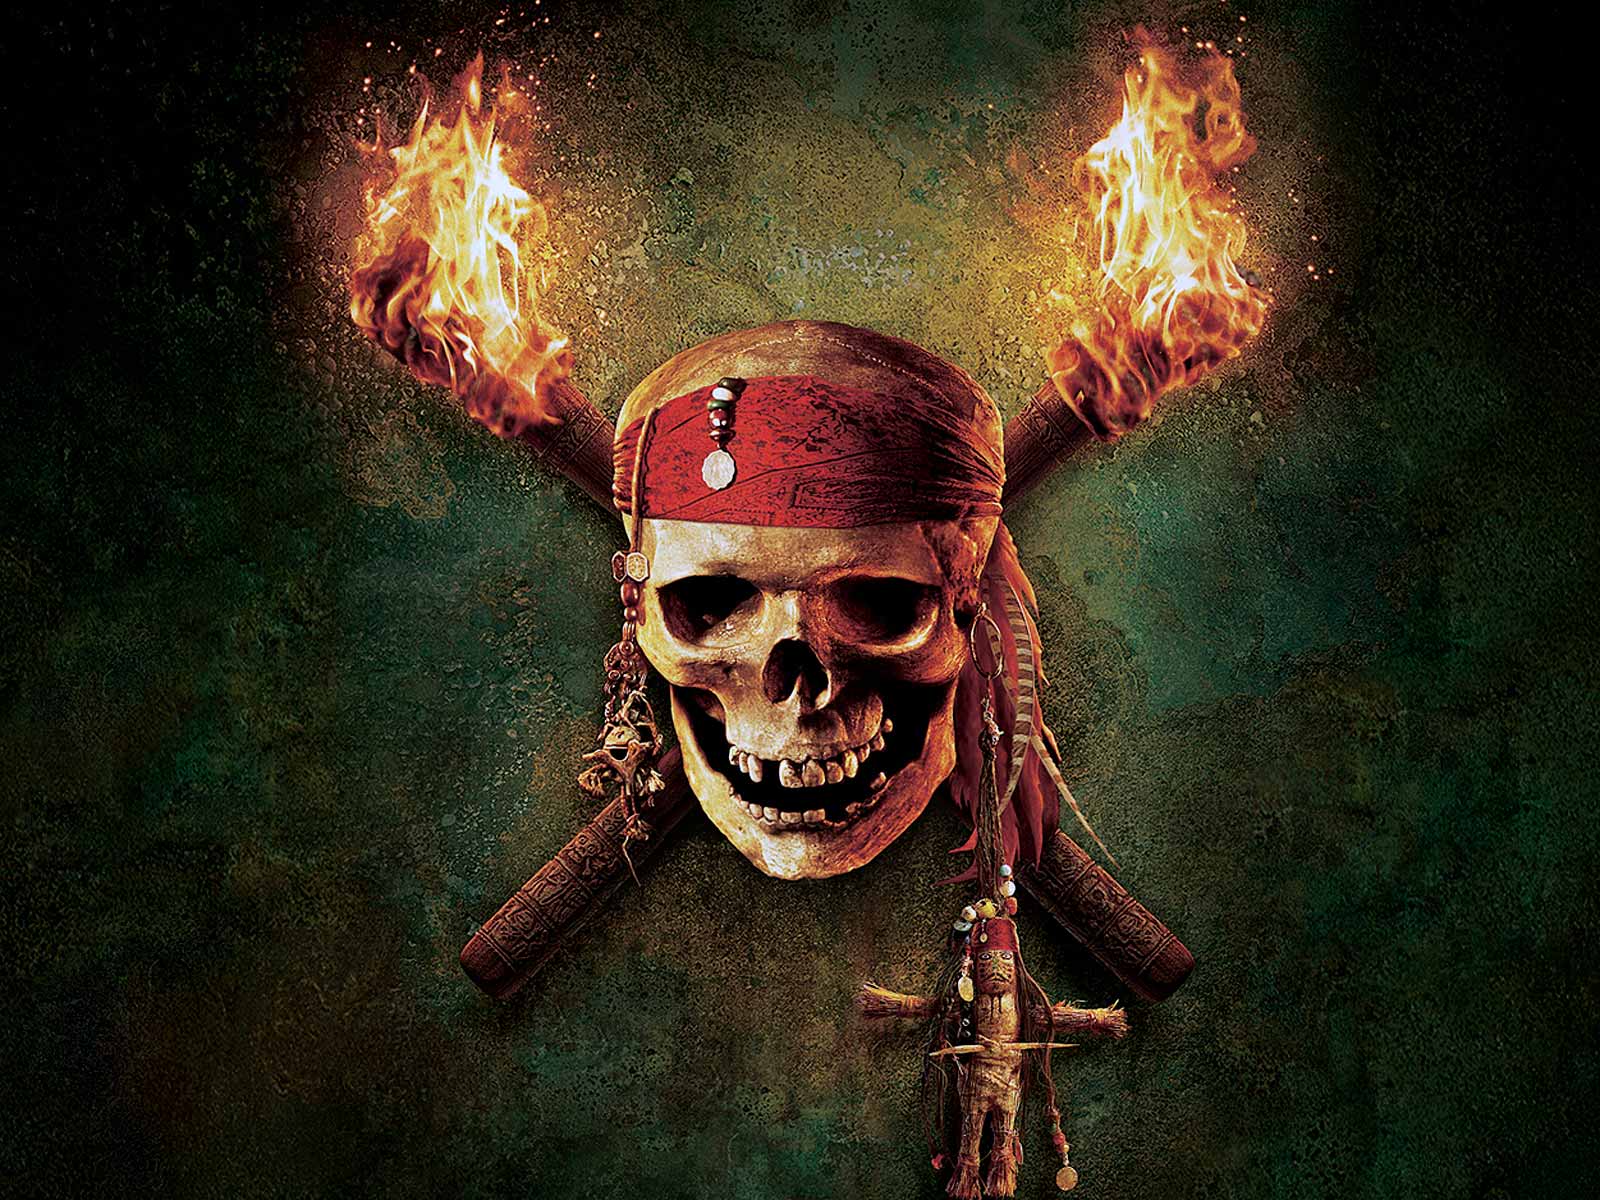 pirate skull logo from the Pirates of the Caribbean movies wallpaper